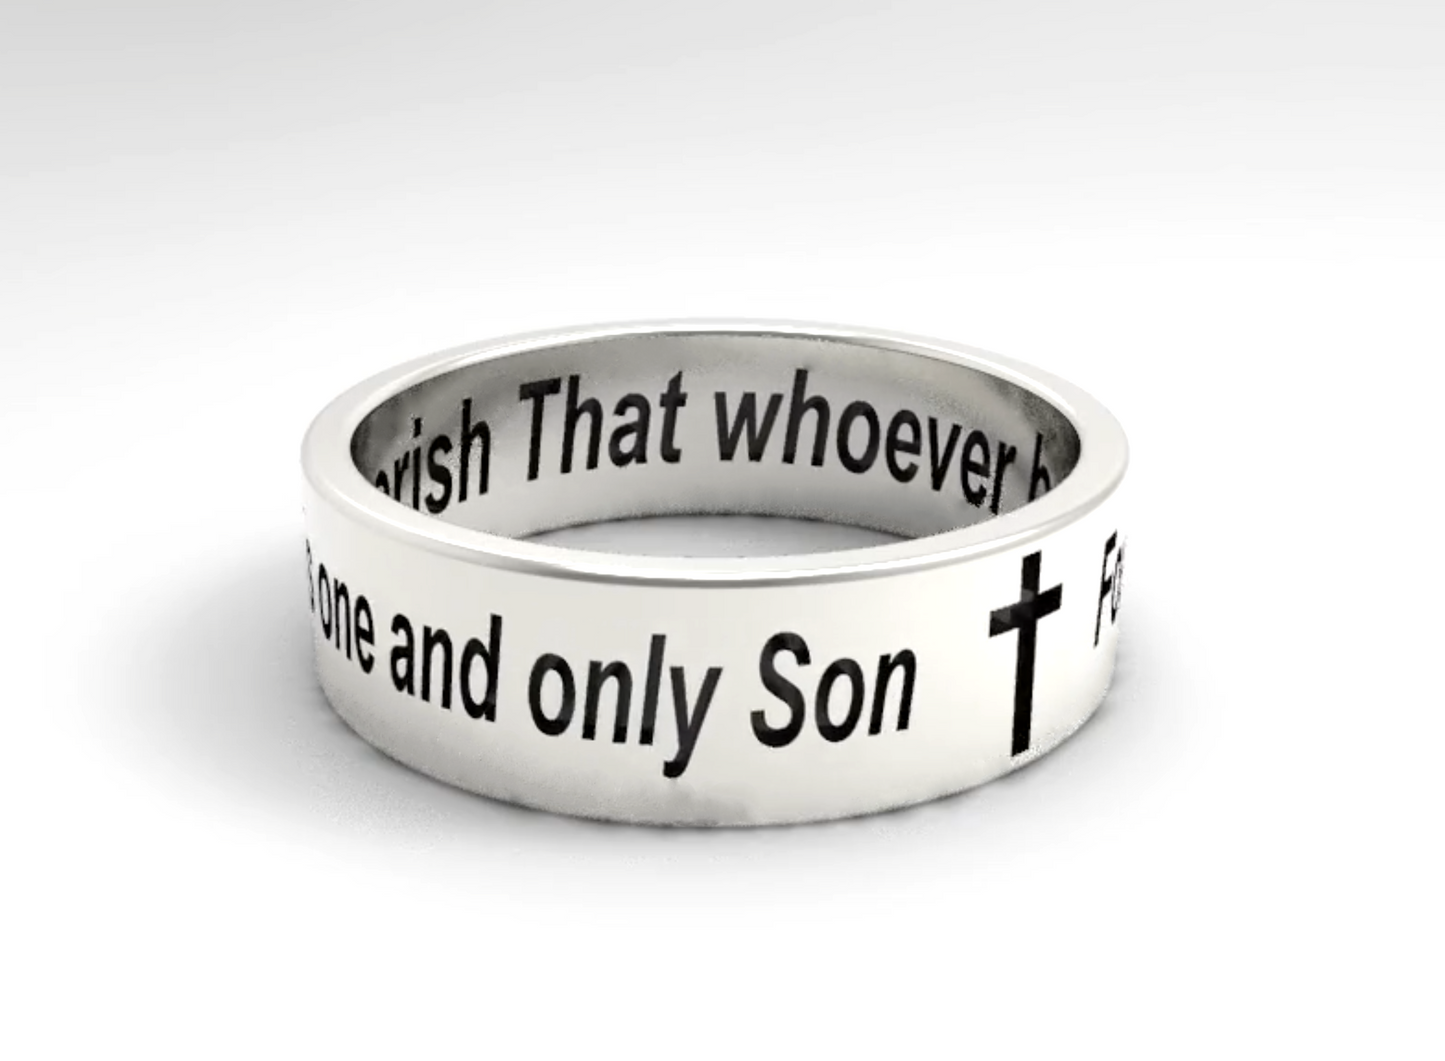 Religious Ring Band John 3:16 For God so loved the world that he gave his one and only Son Sterling Silver 925 ring 1.3mm wide 6mm thick